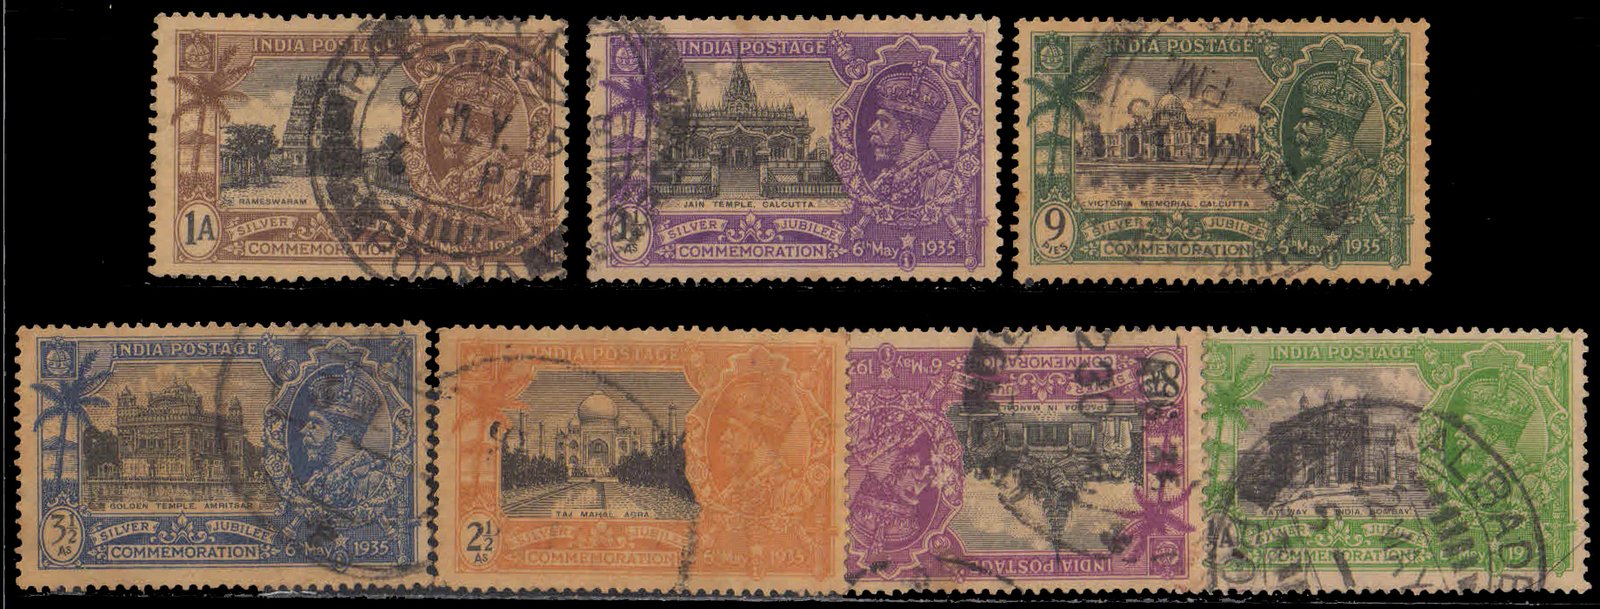 INDIA 1935-Silver Jubilee of King George, Gateway of India, Victoria Memorial, Jain Temple, Taj Mahal, Golden Temple, Set of 7 Stamps, Used, As Per Scan